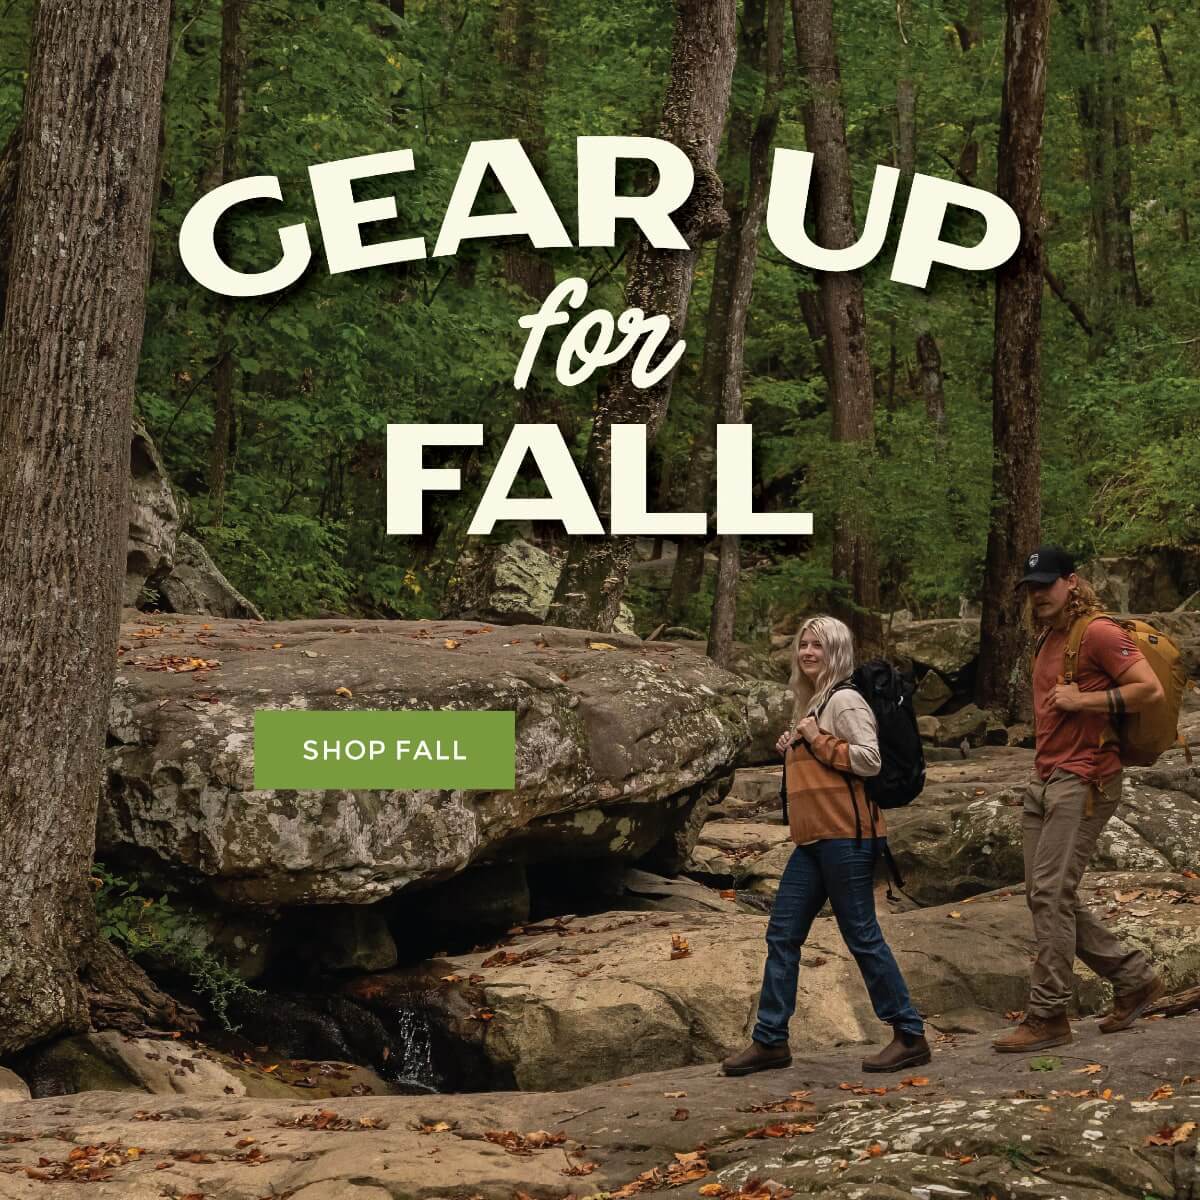 Gear up for Fall Promo Image of couple hiking on trail with hiking gear